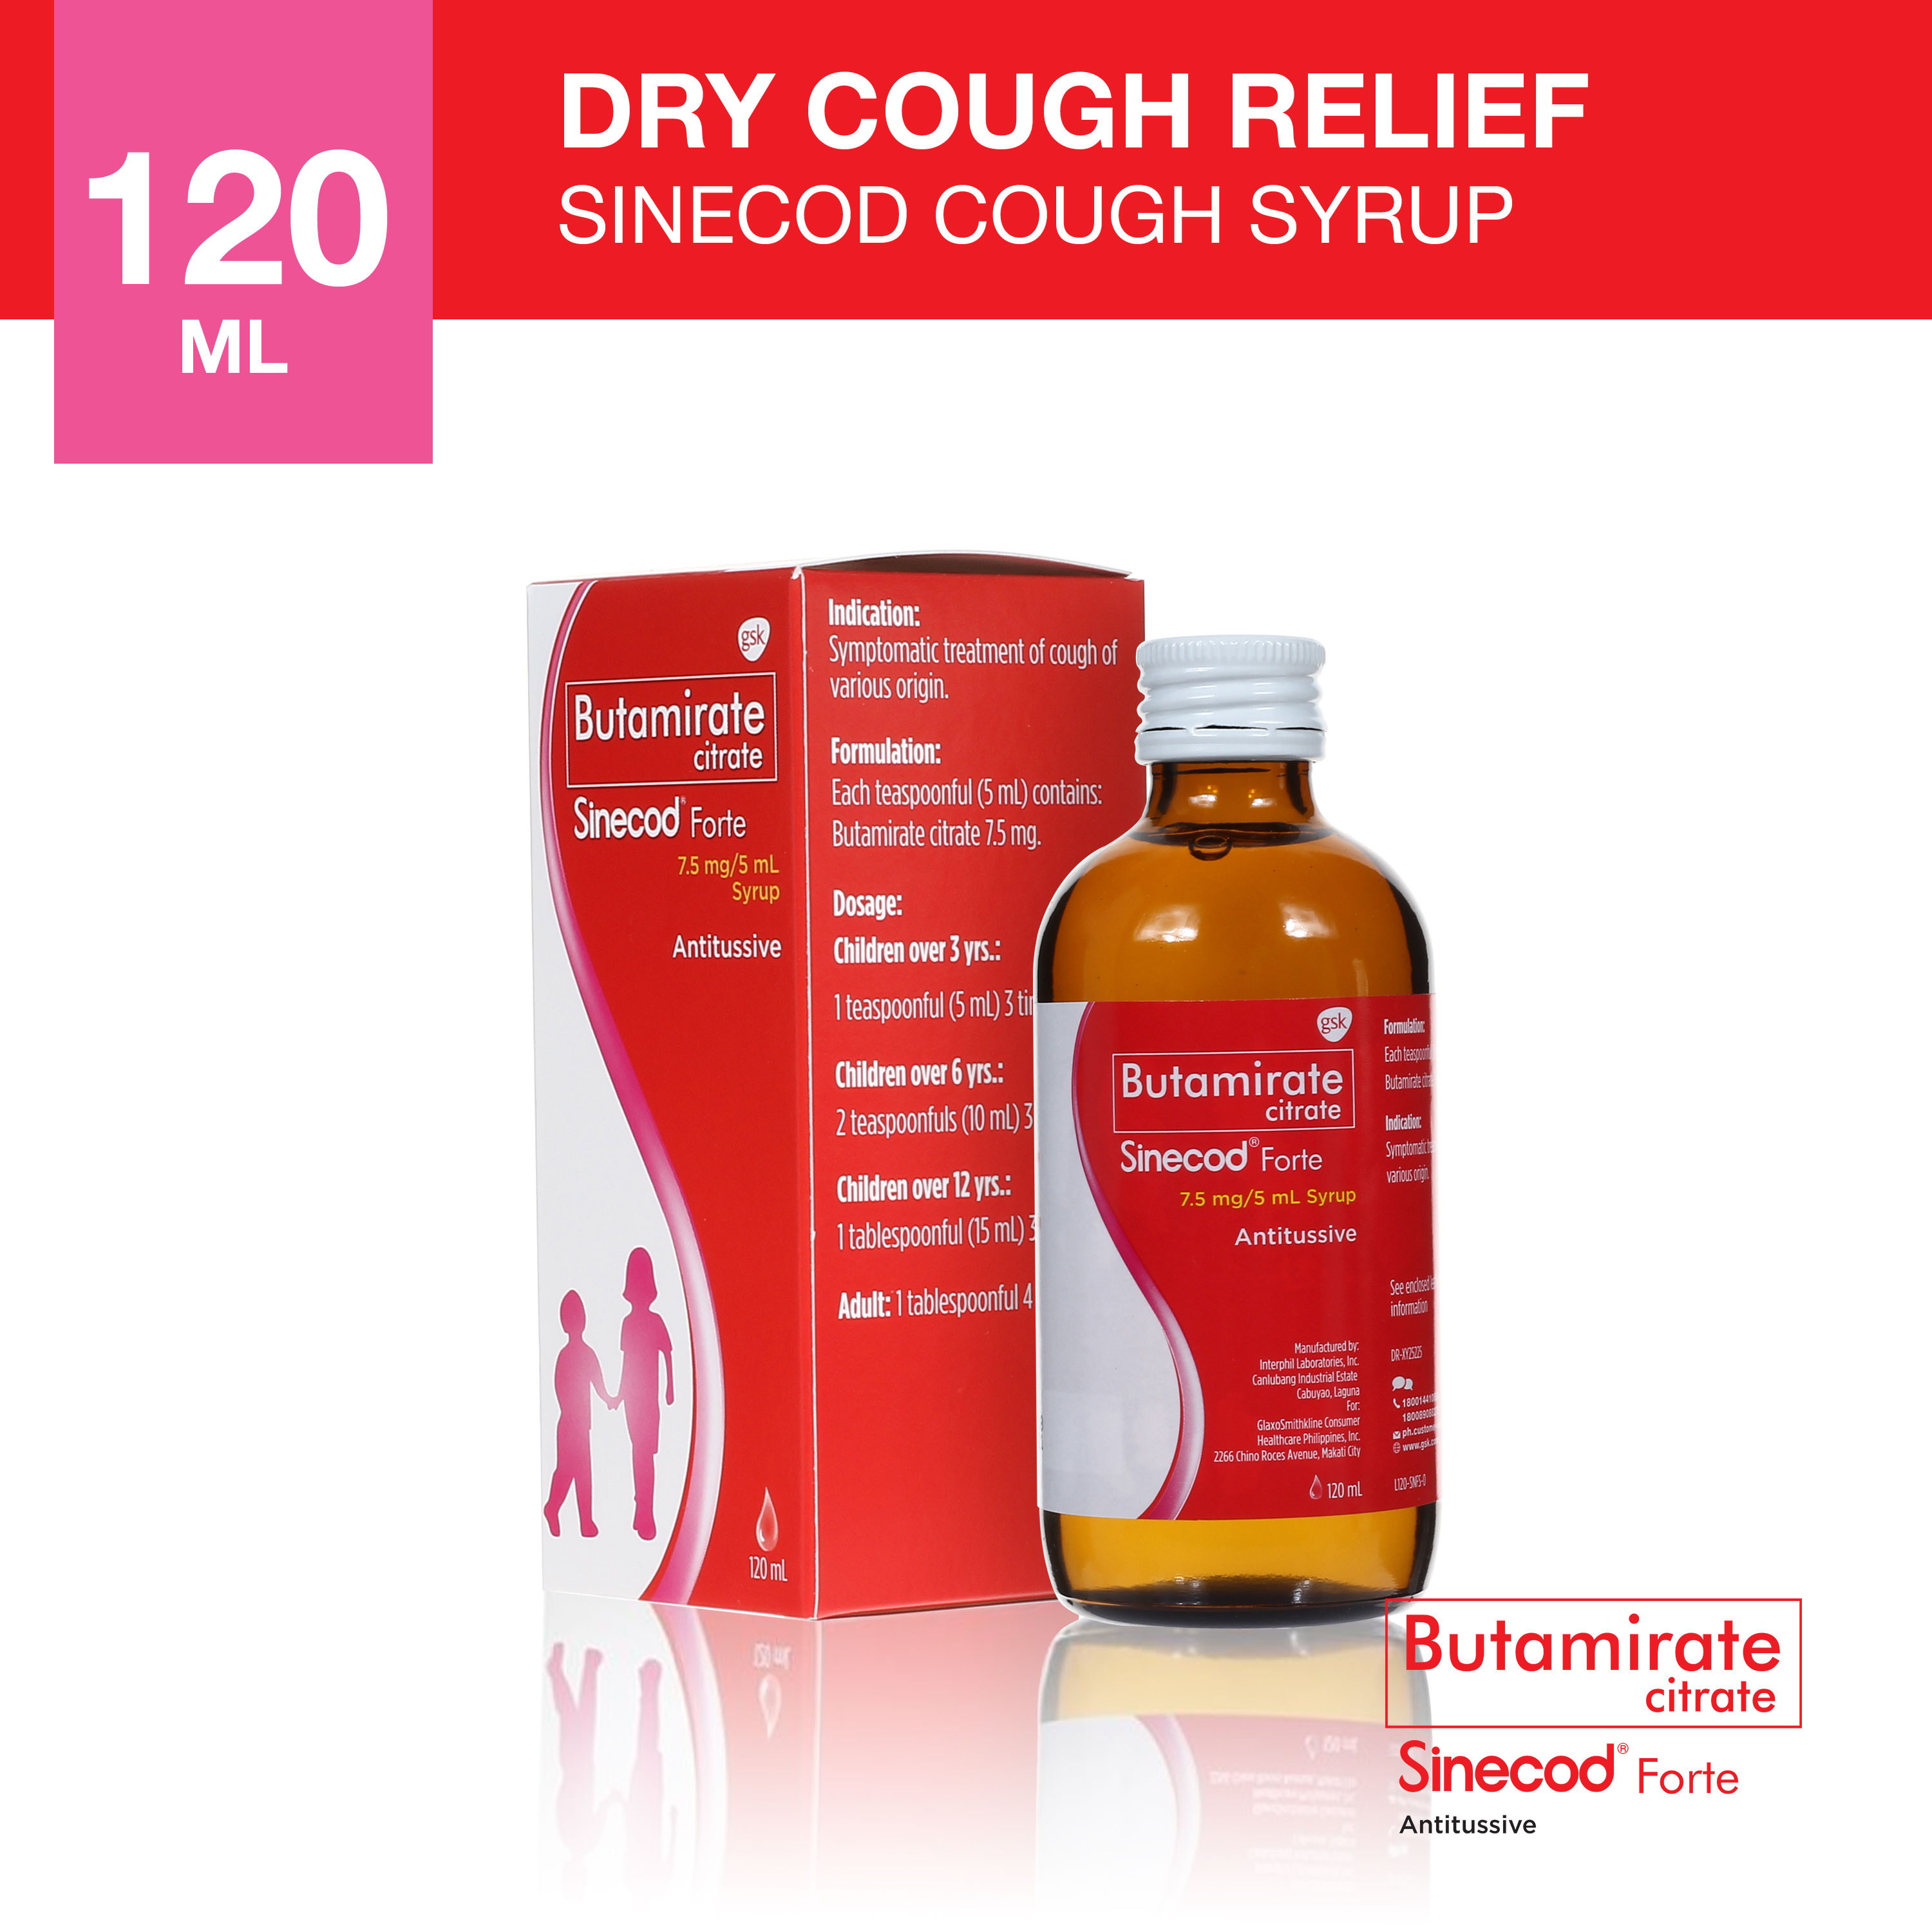 Dry cough syrup